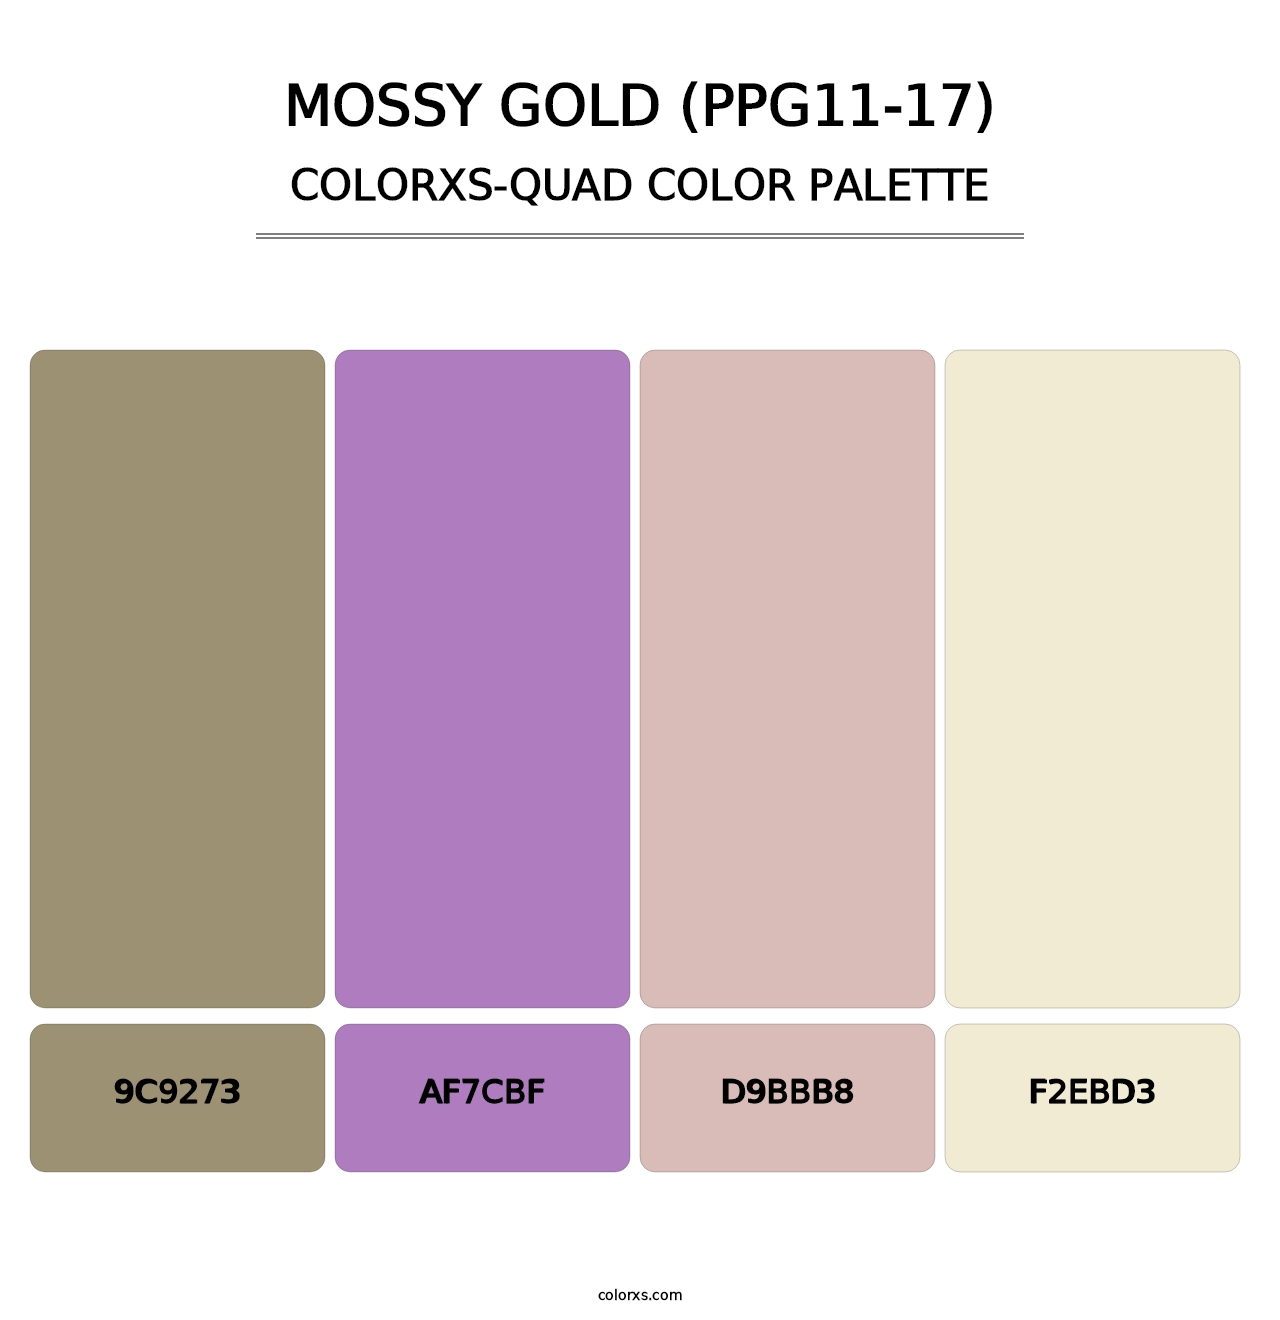 Mossy Gold (PPG11-17) - Colorxs Quad Palette